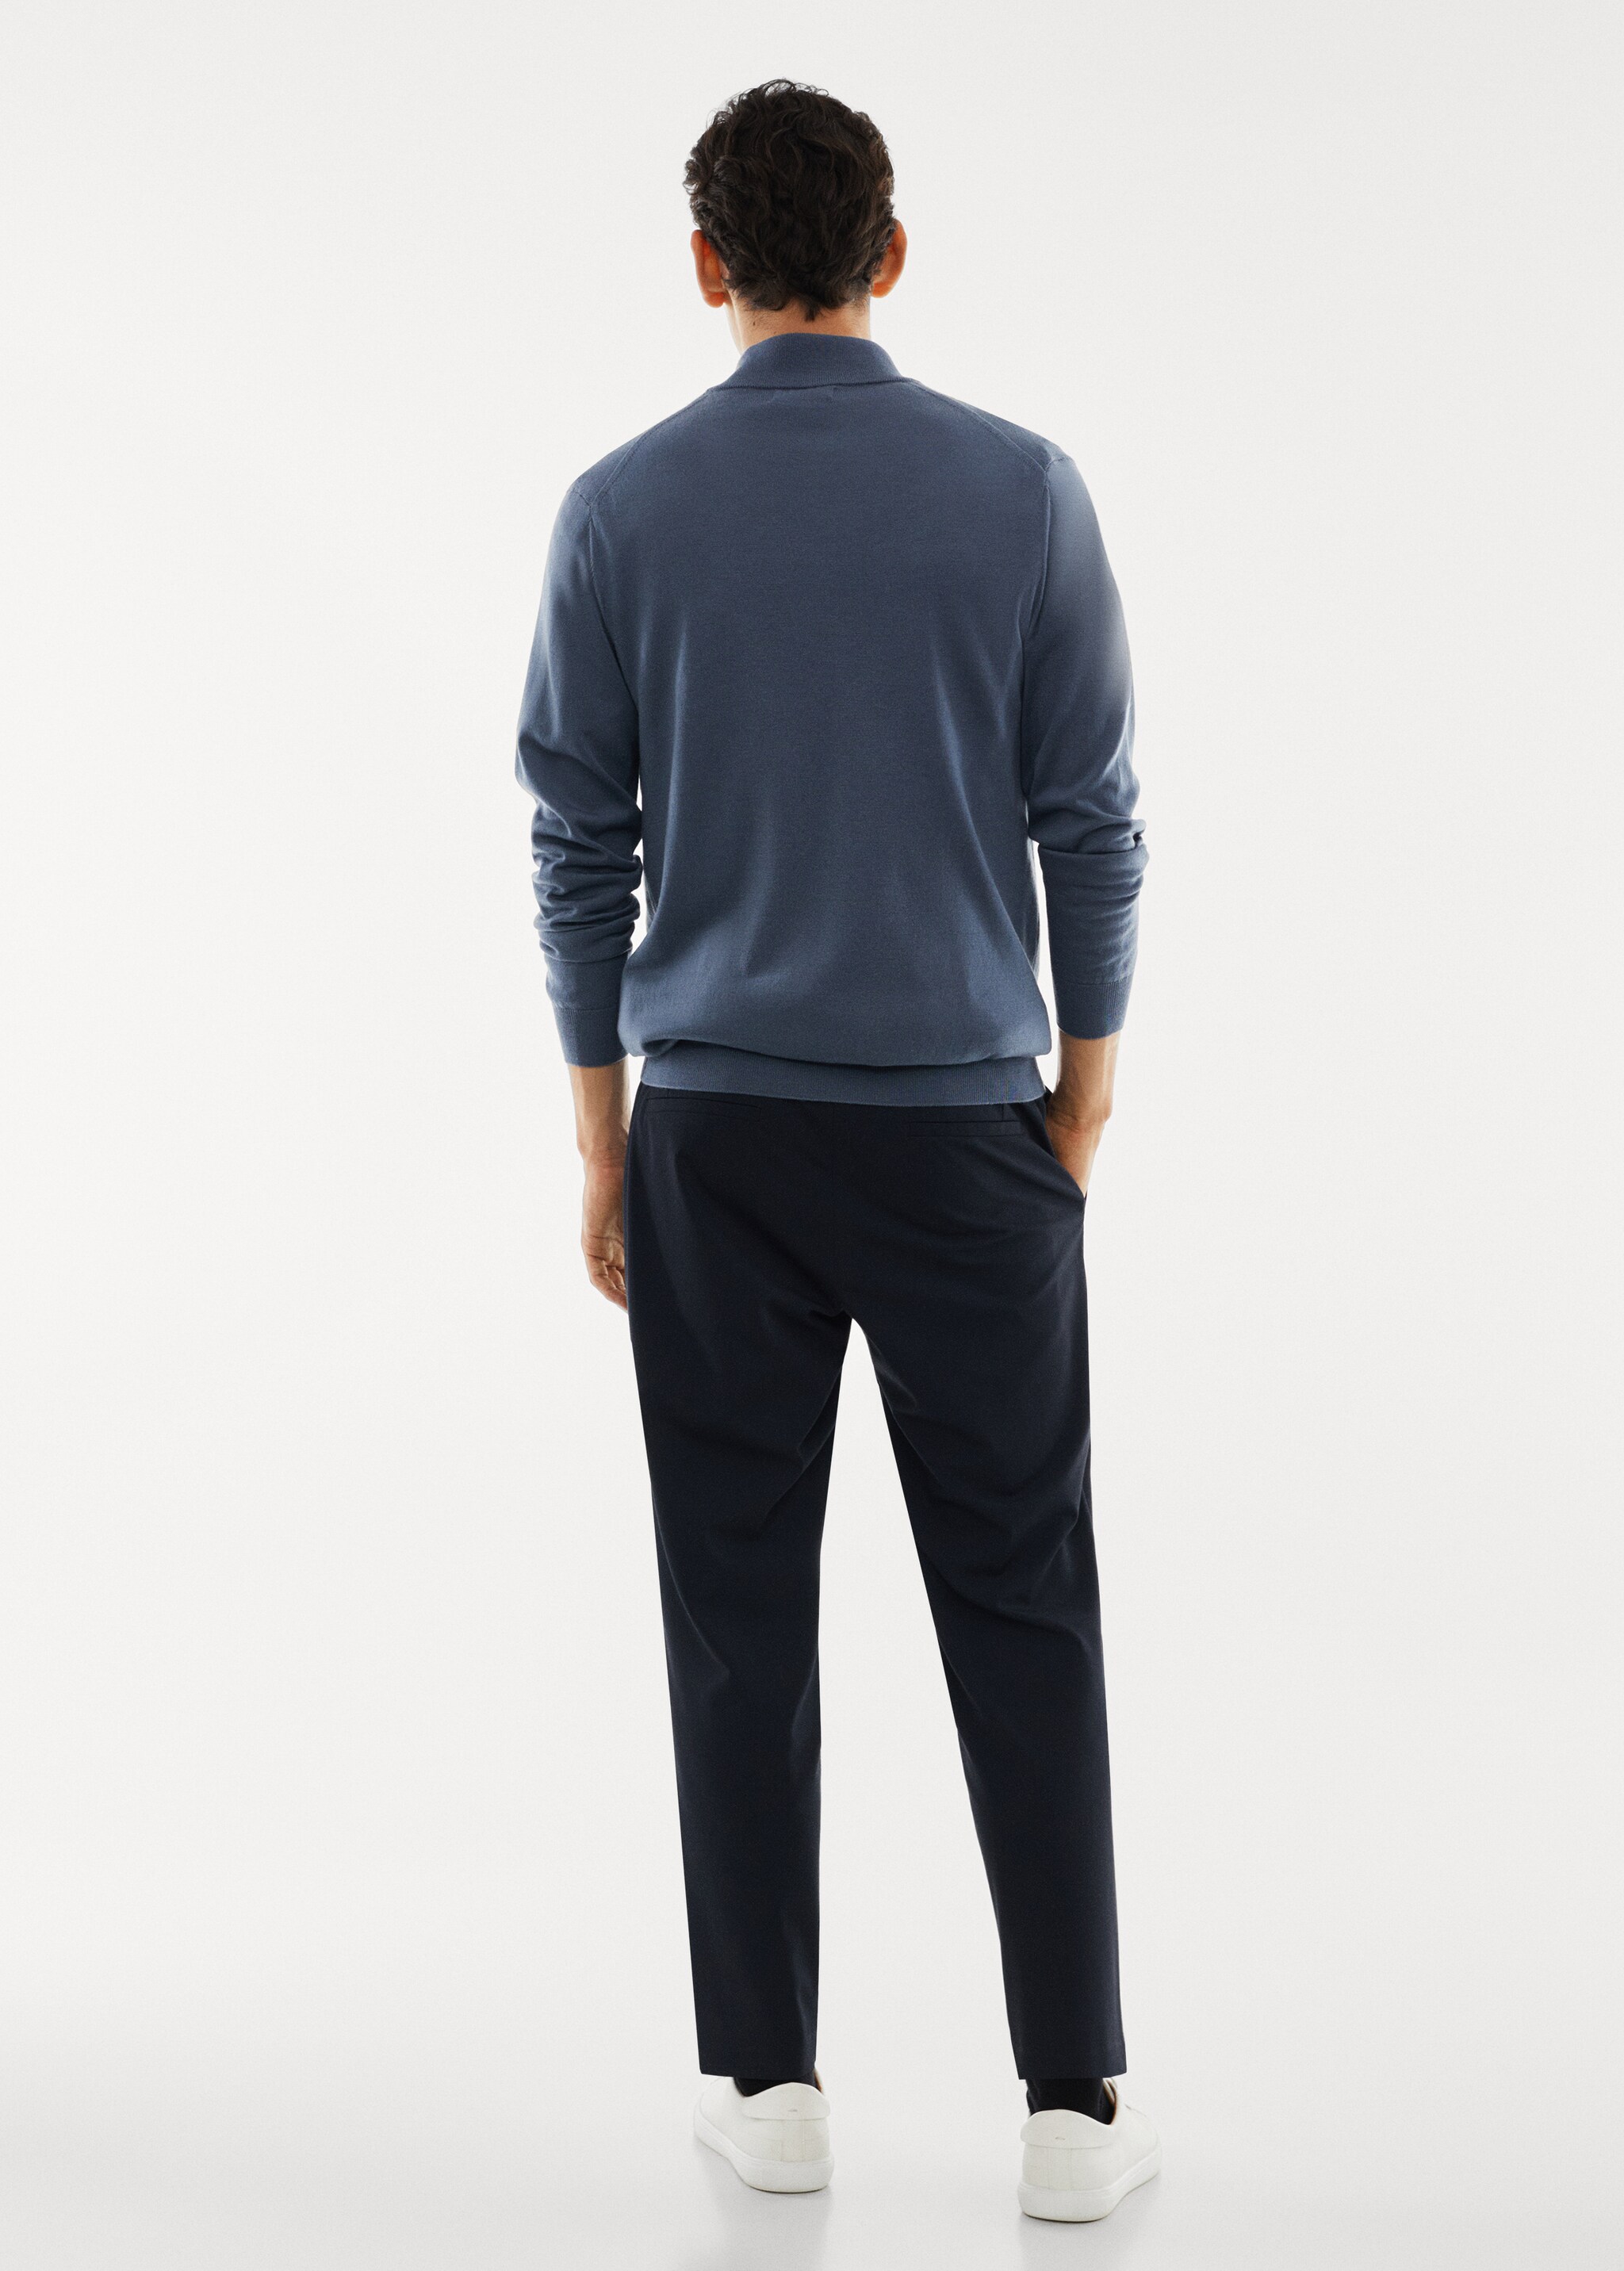 100% merino wool sweater with zip collar - Reverse of the article